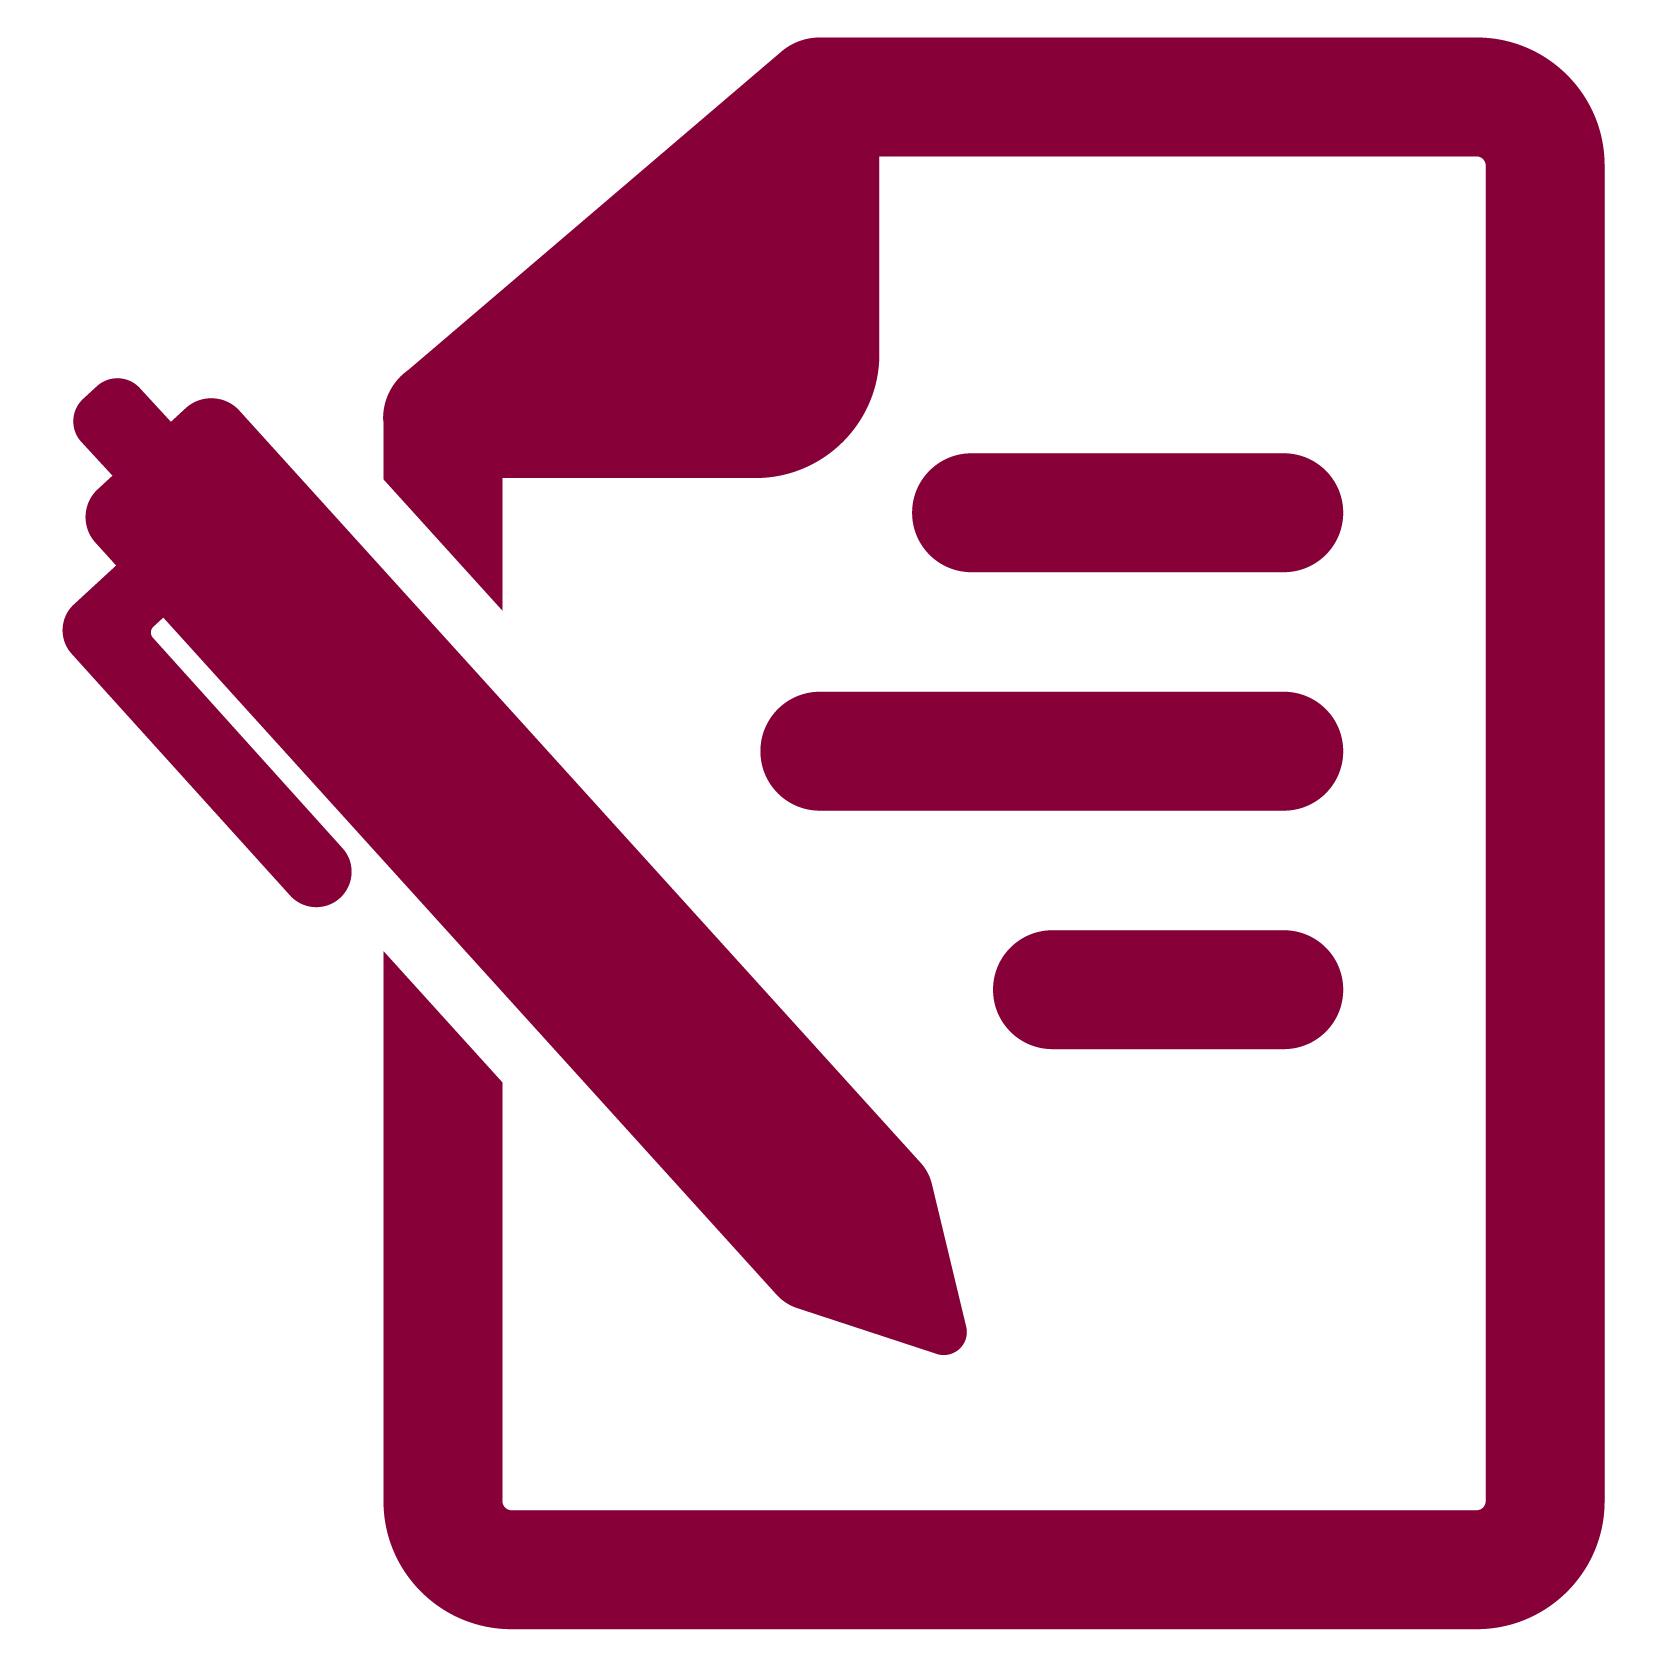 Icon of pen and paper